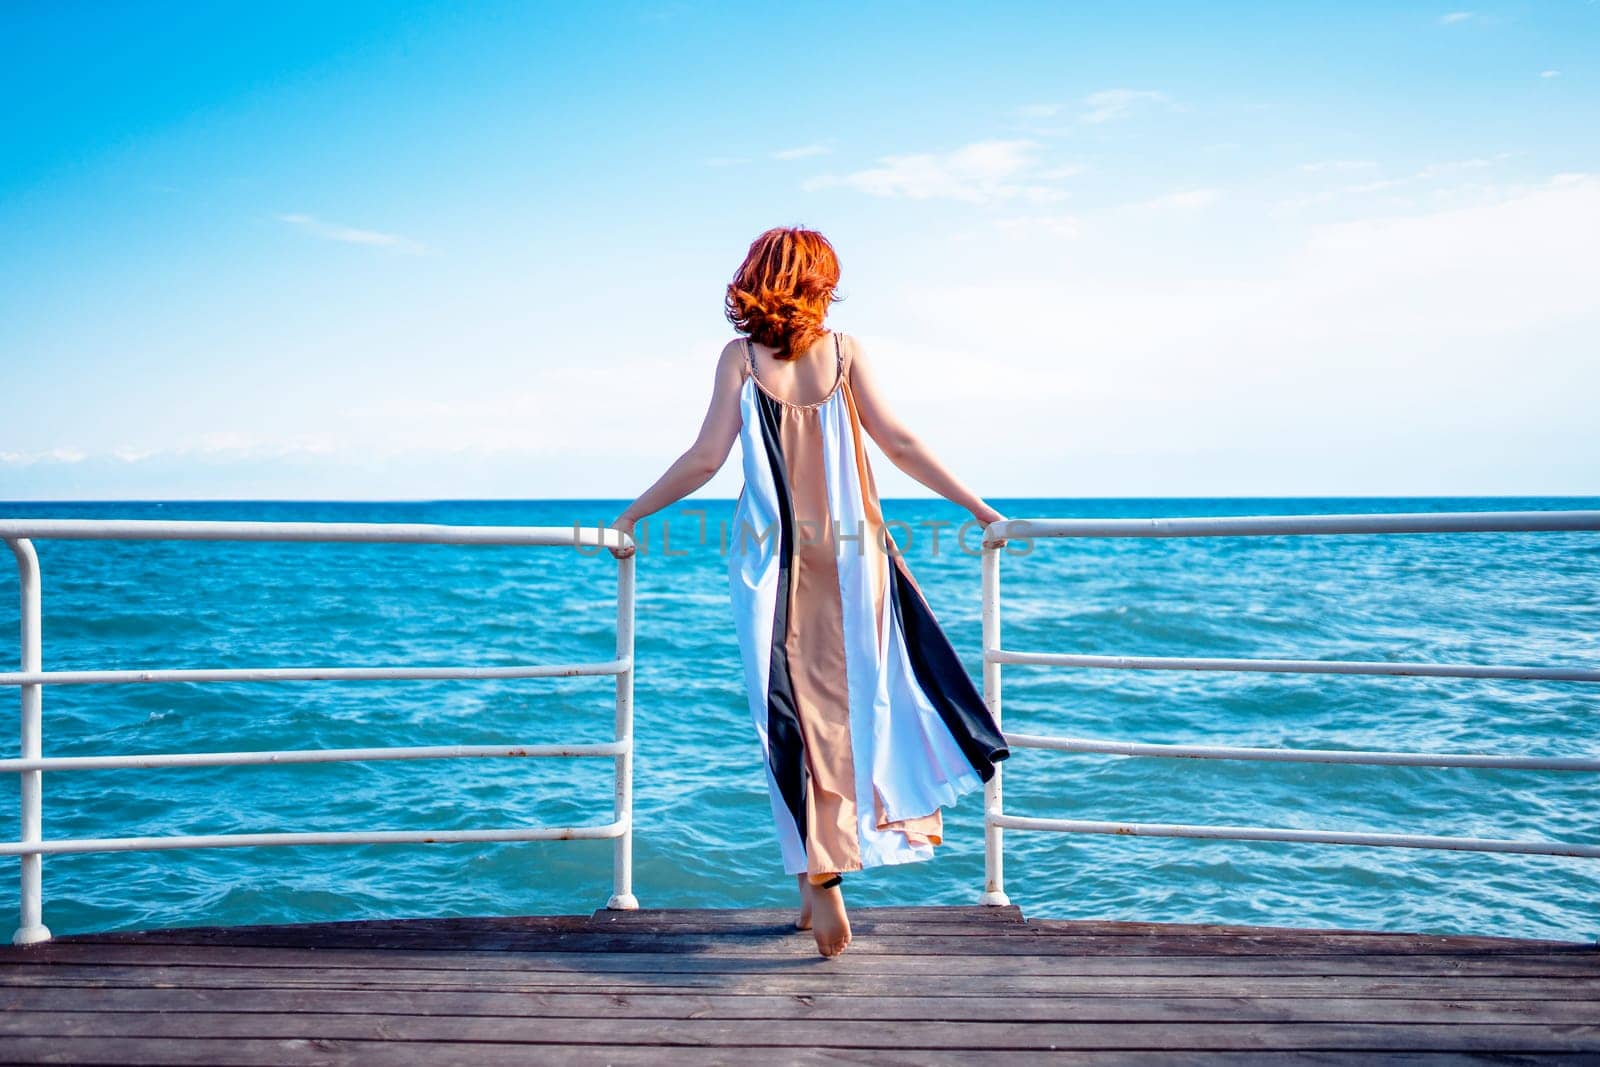 Behind girl on pier. Beautiful red head woman on the pier at the sea.